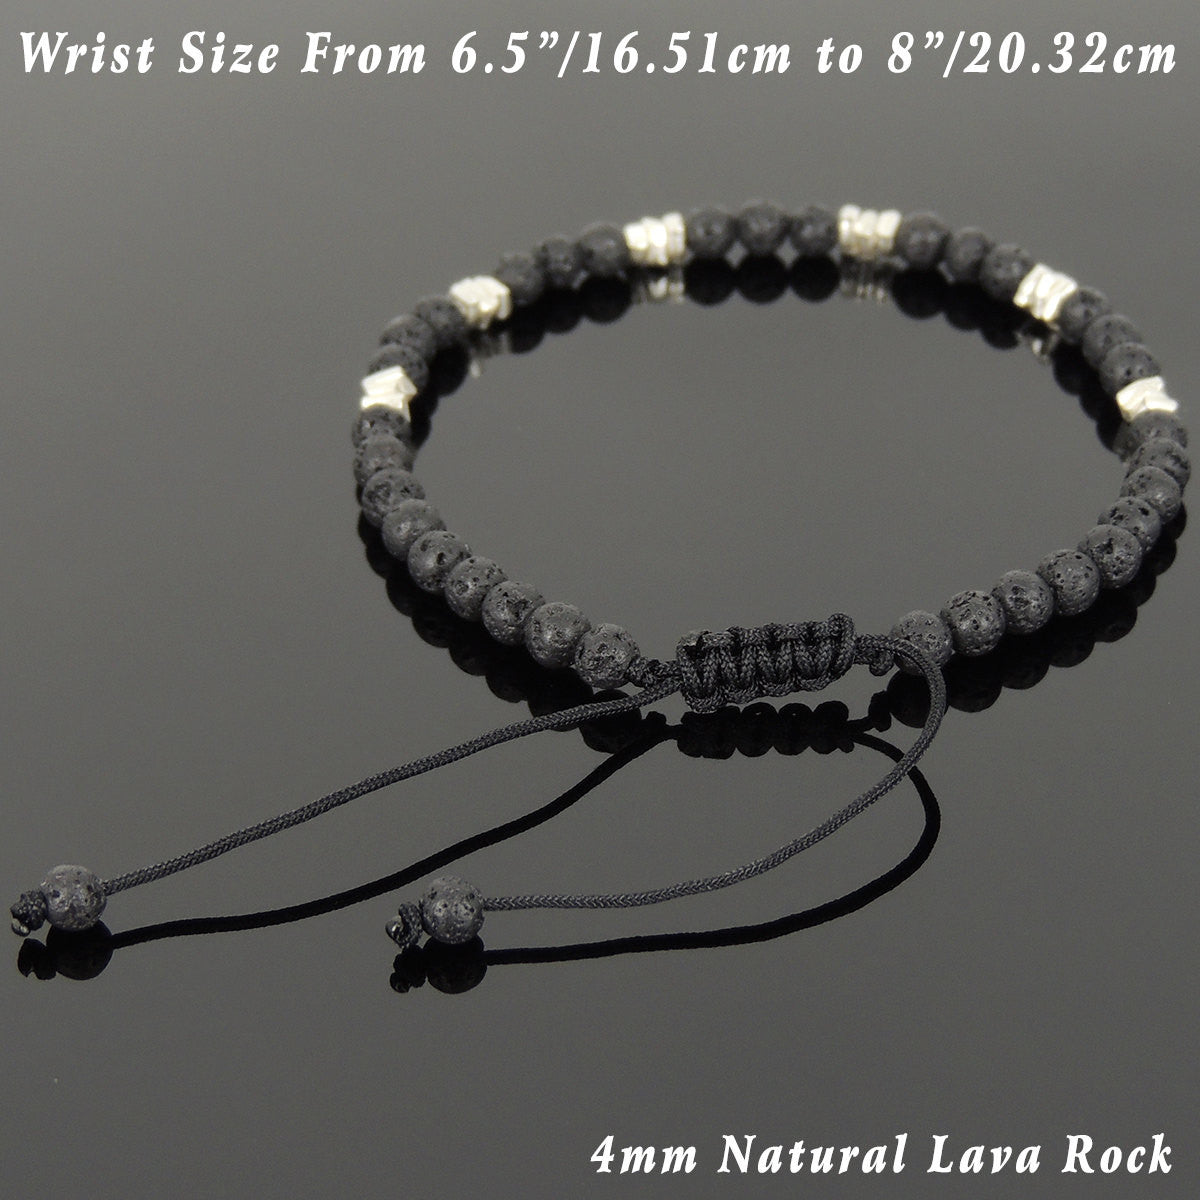 4mm Lava Rock Adjustable Braided Stone Bracelet with S925 Sterling Silver Nugget Beads - Handmade by Gem & Silver BR948